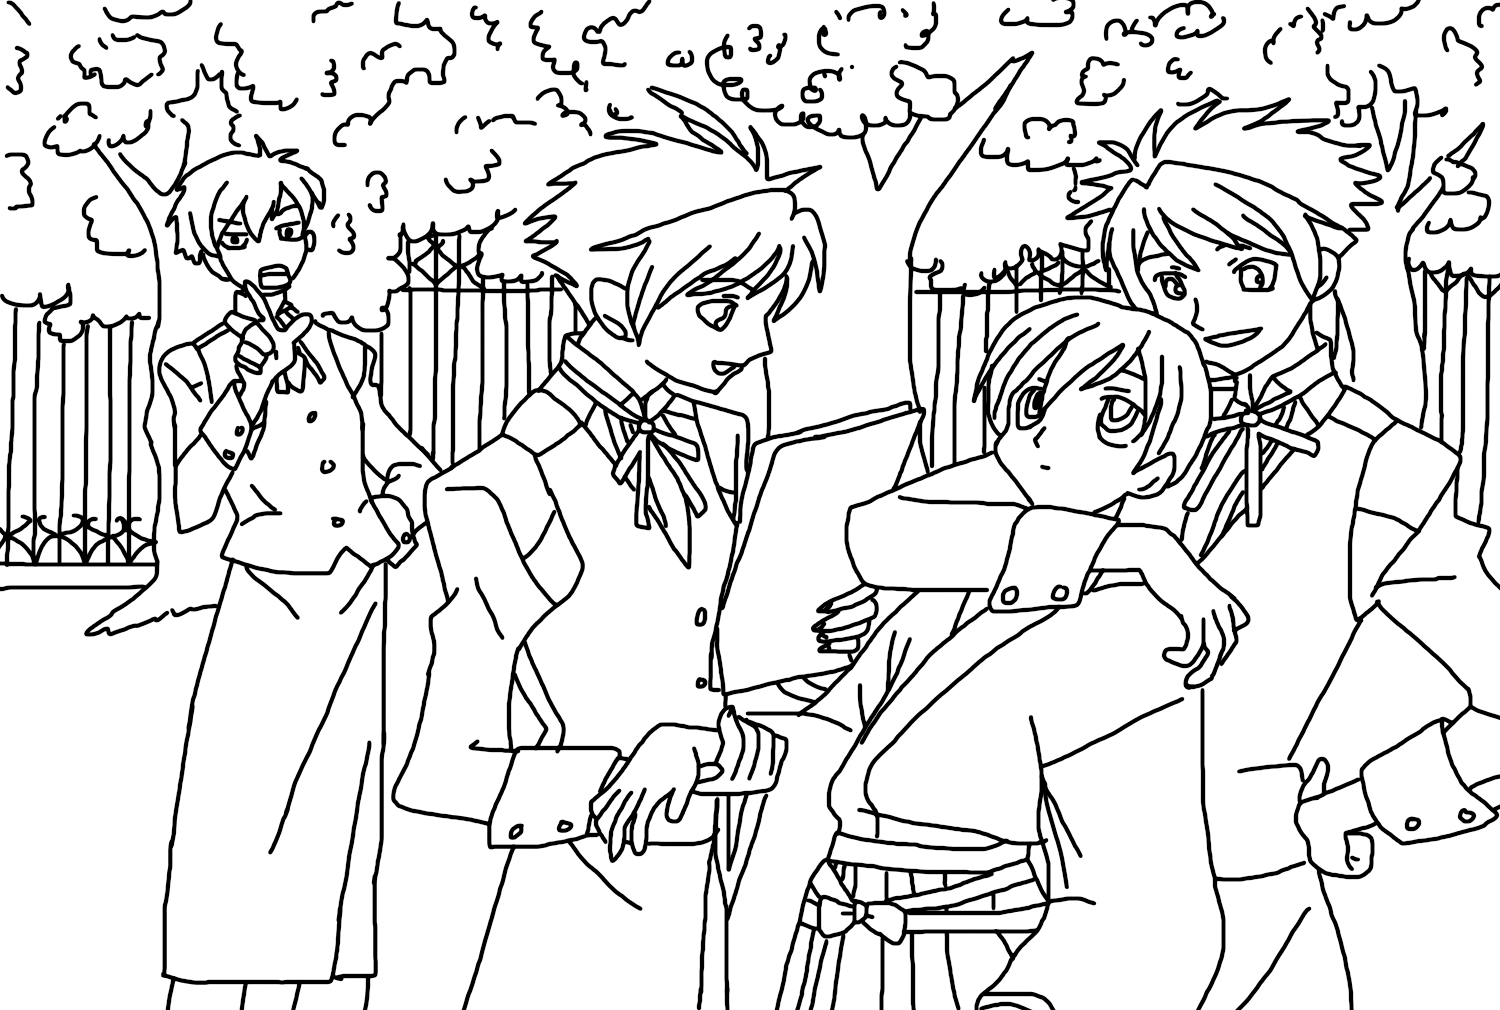 Coloring Page Ouran High School Host Club from Haruhi Fujioka